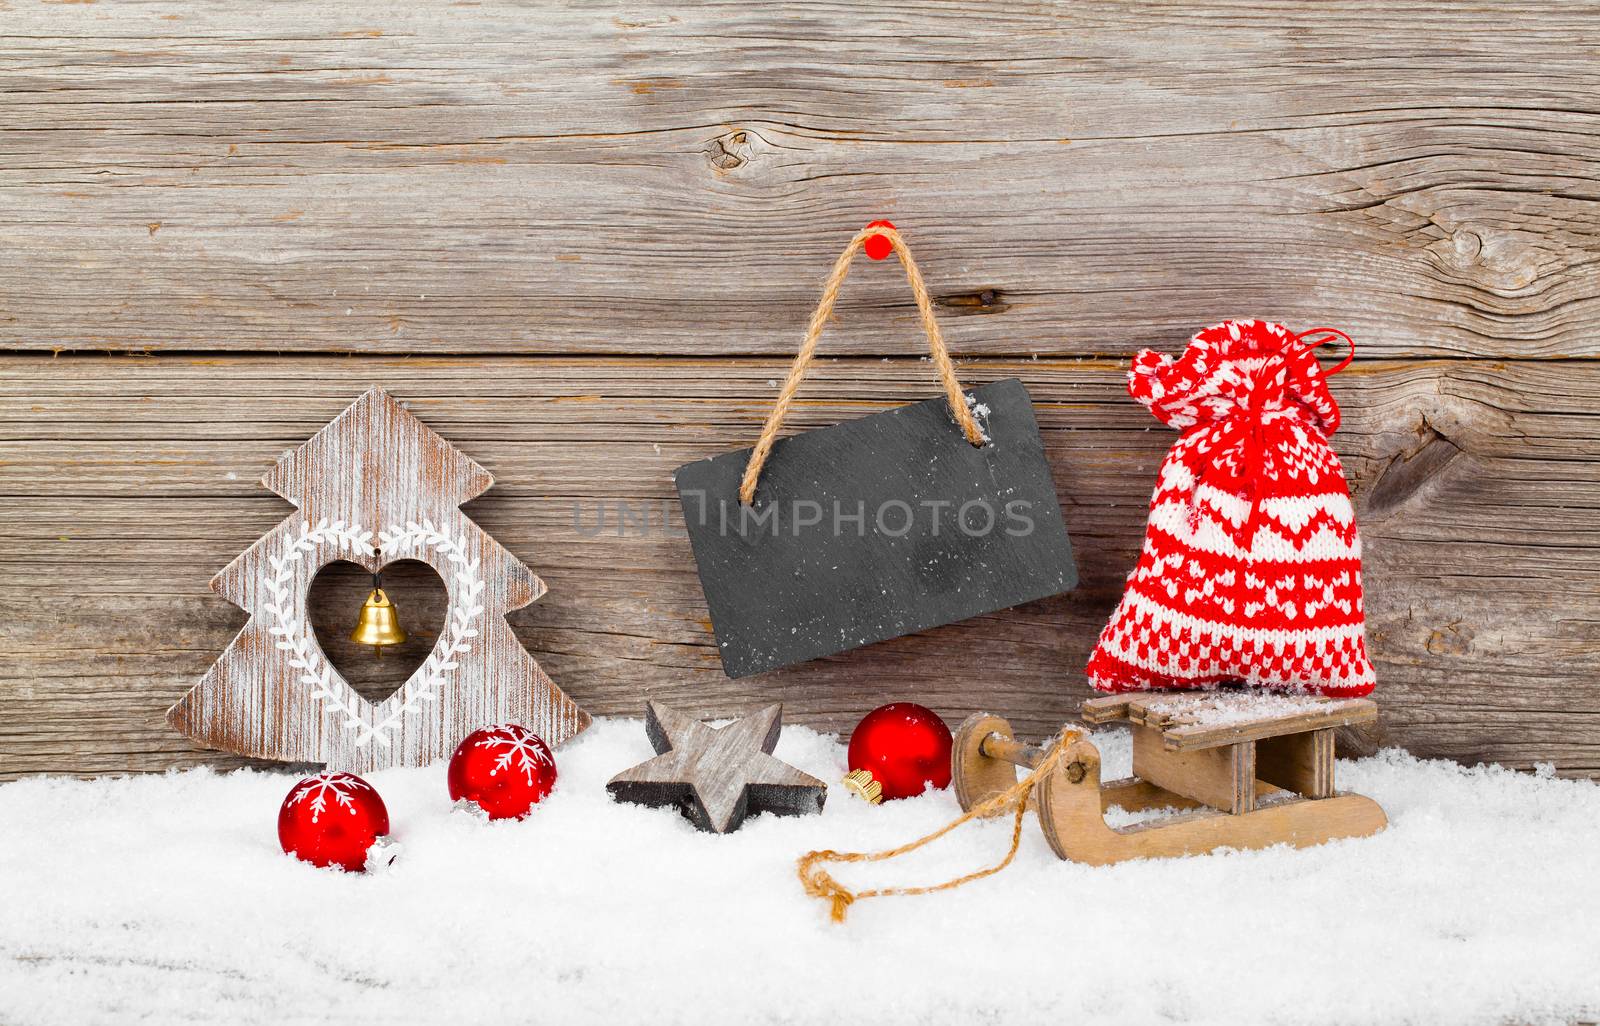 Christmas decoration with xmas canes, over wooden background by motorolka